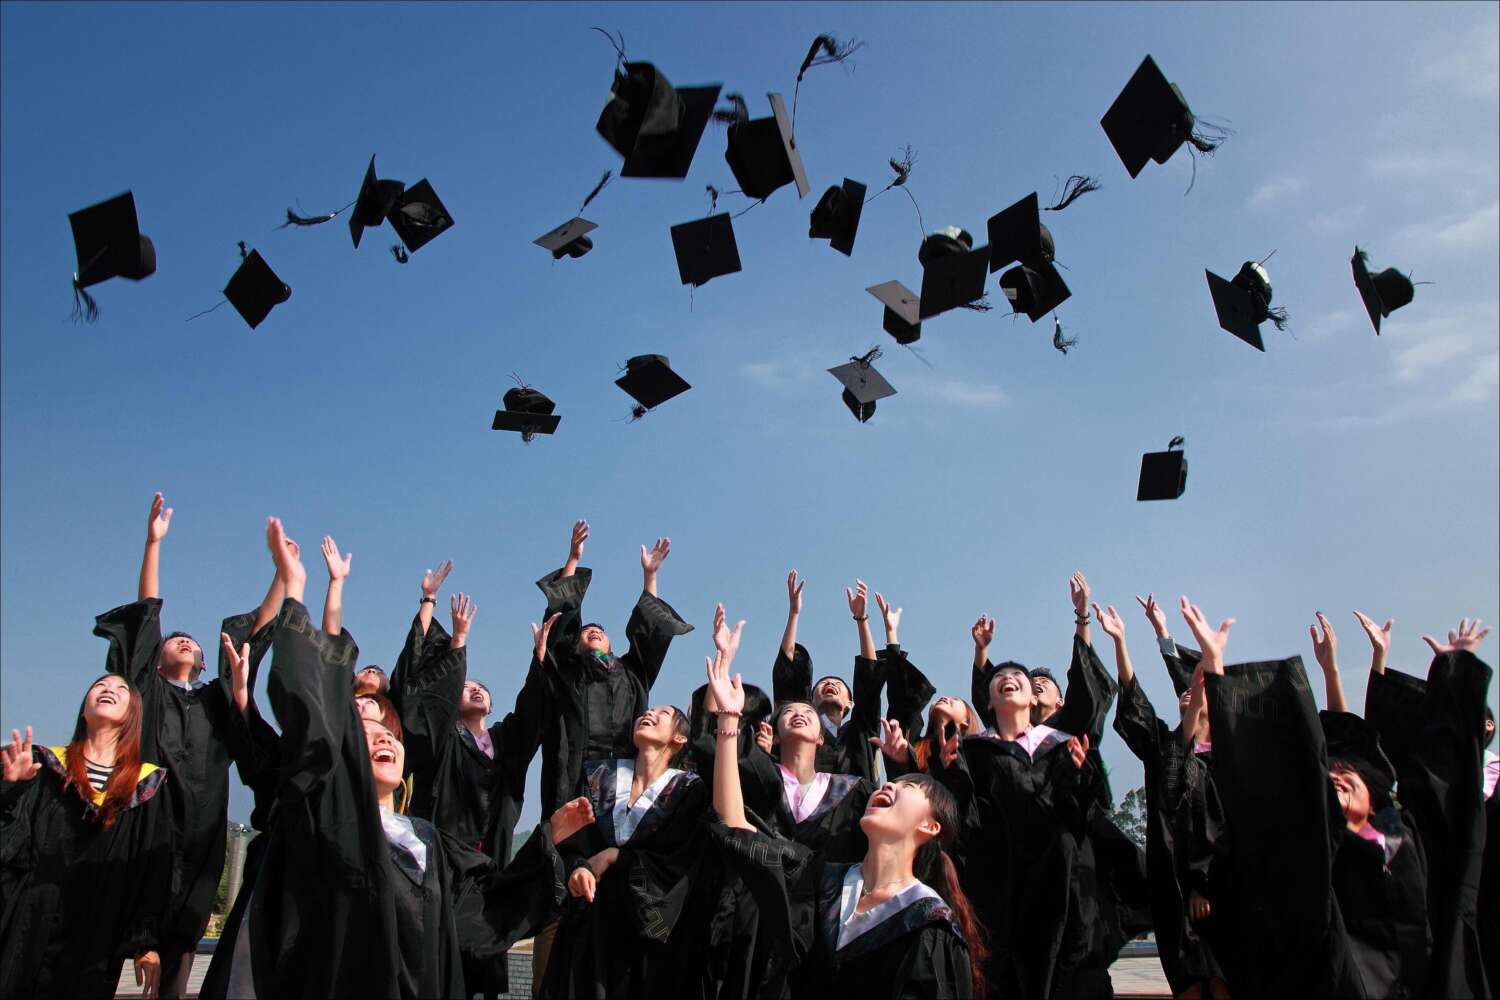 This image shows around fifteen to twenty students celebrating their graduation by throwing their graduation caps in the air.